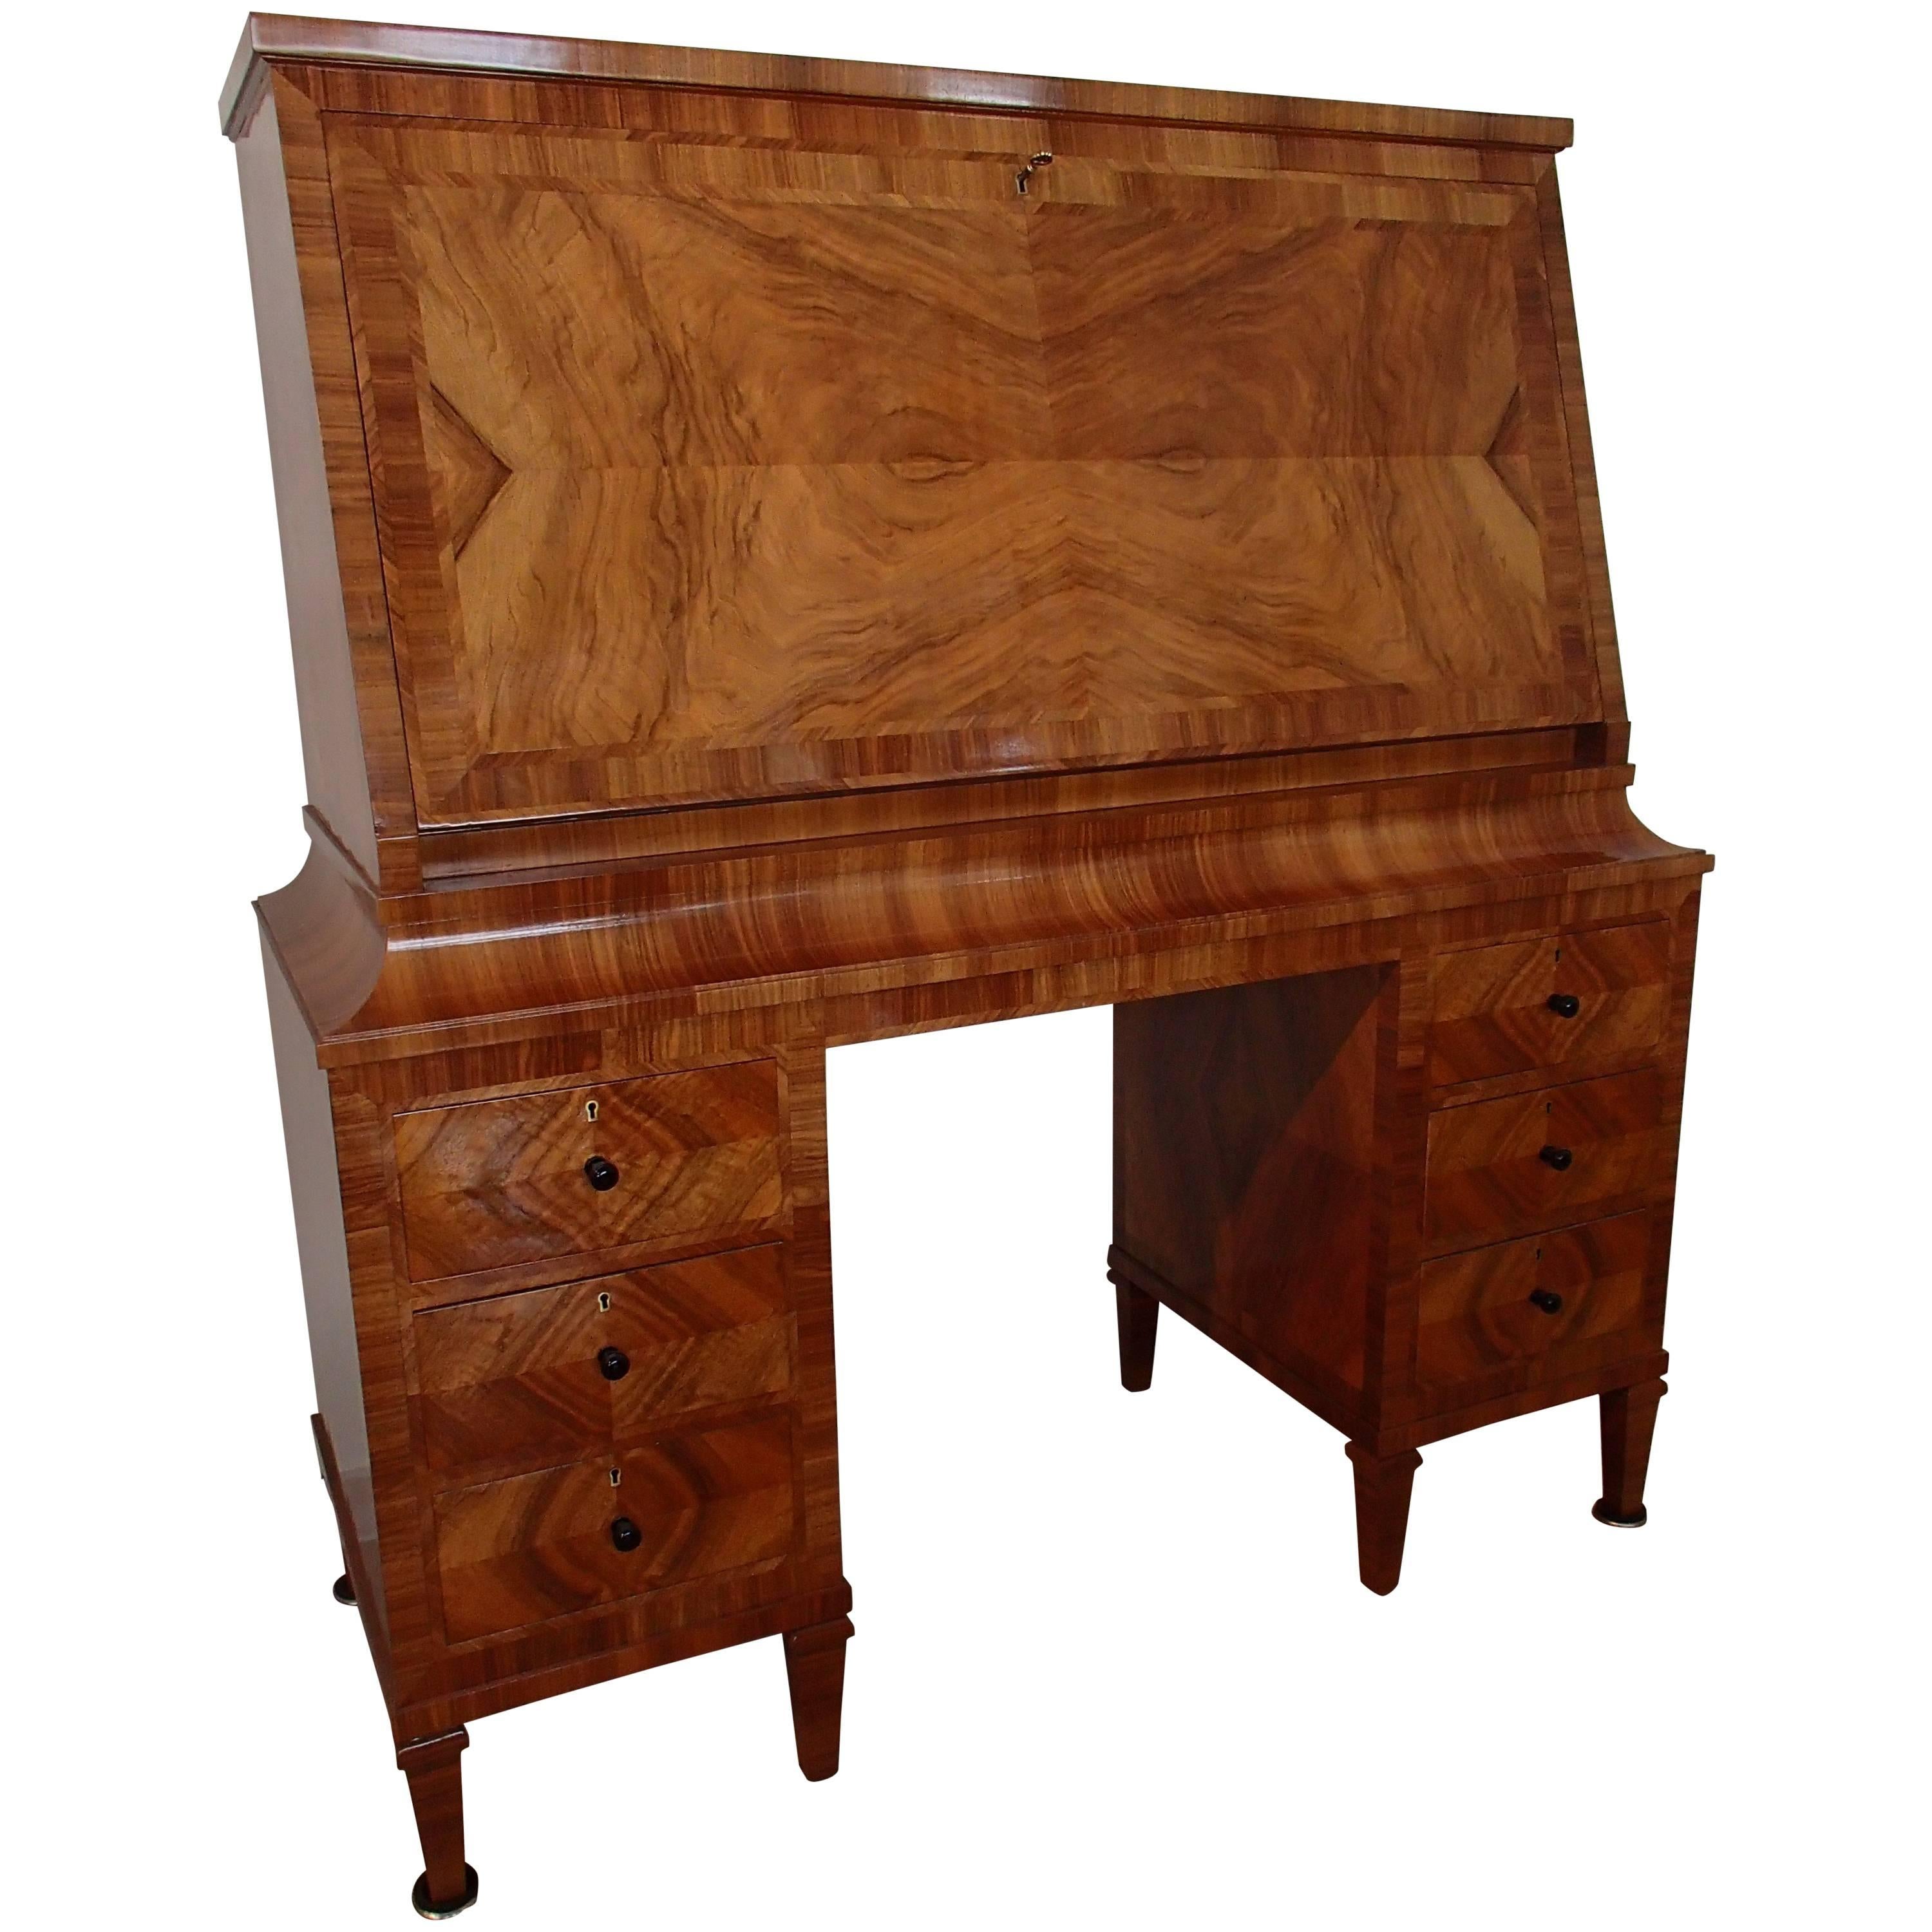 1920 Walnut Secretaire with 16 Drawers and Leather Desk For Sale